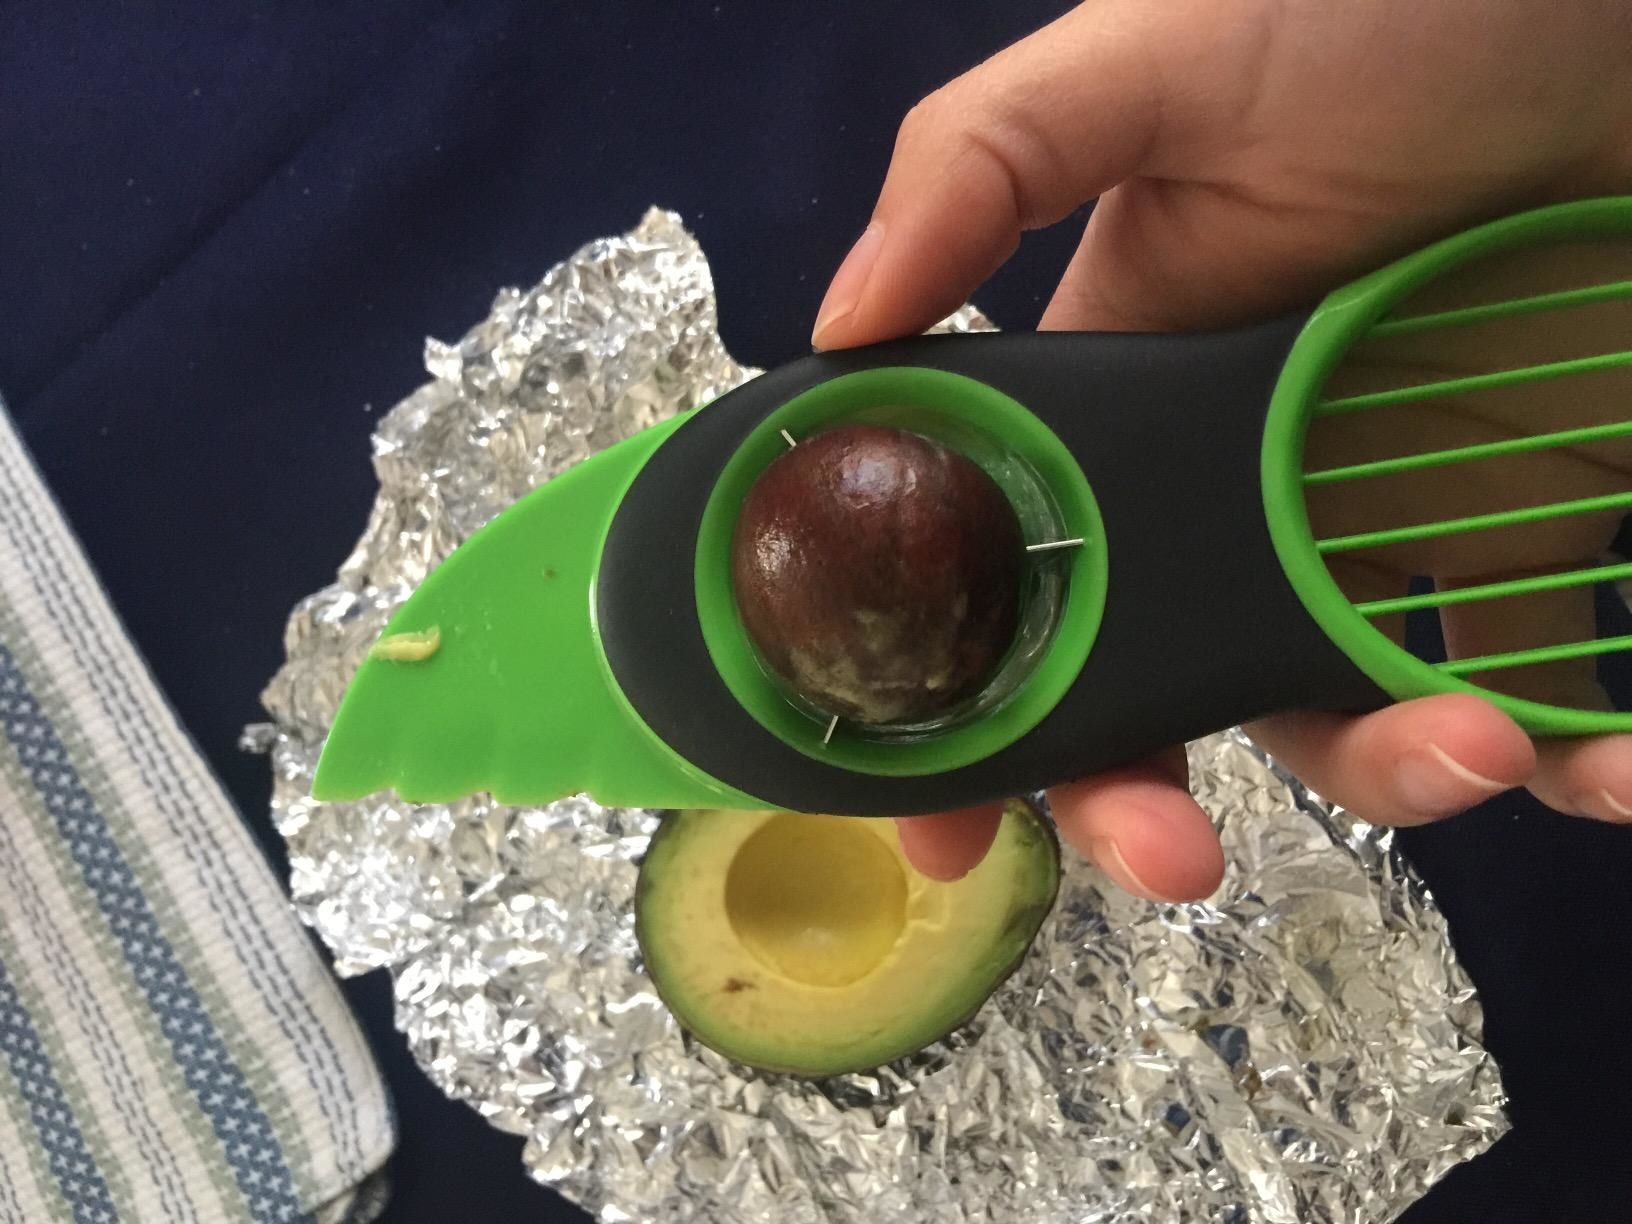 A reviewer removes an avocado pit using the tool